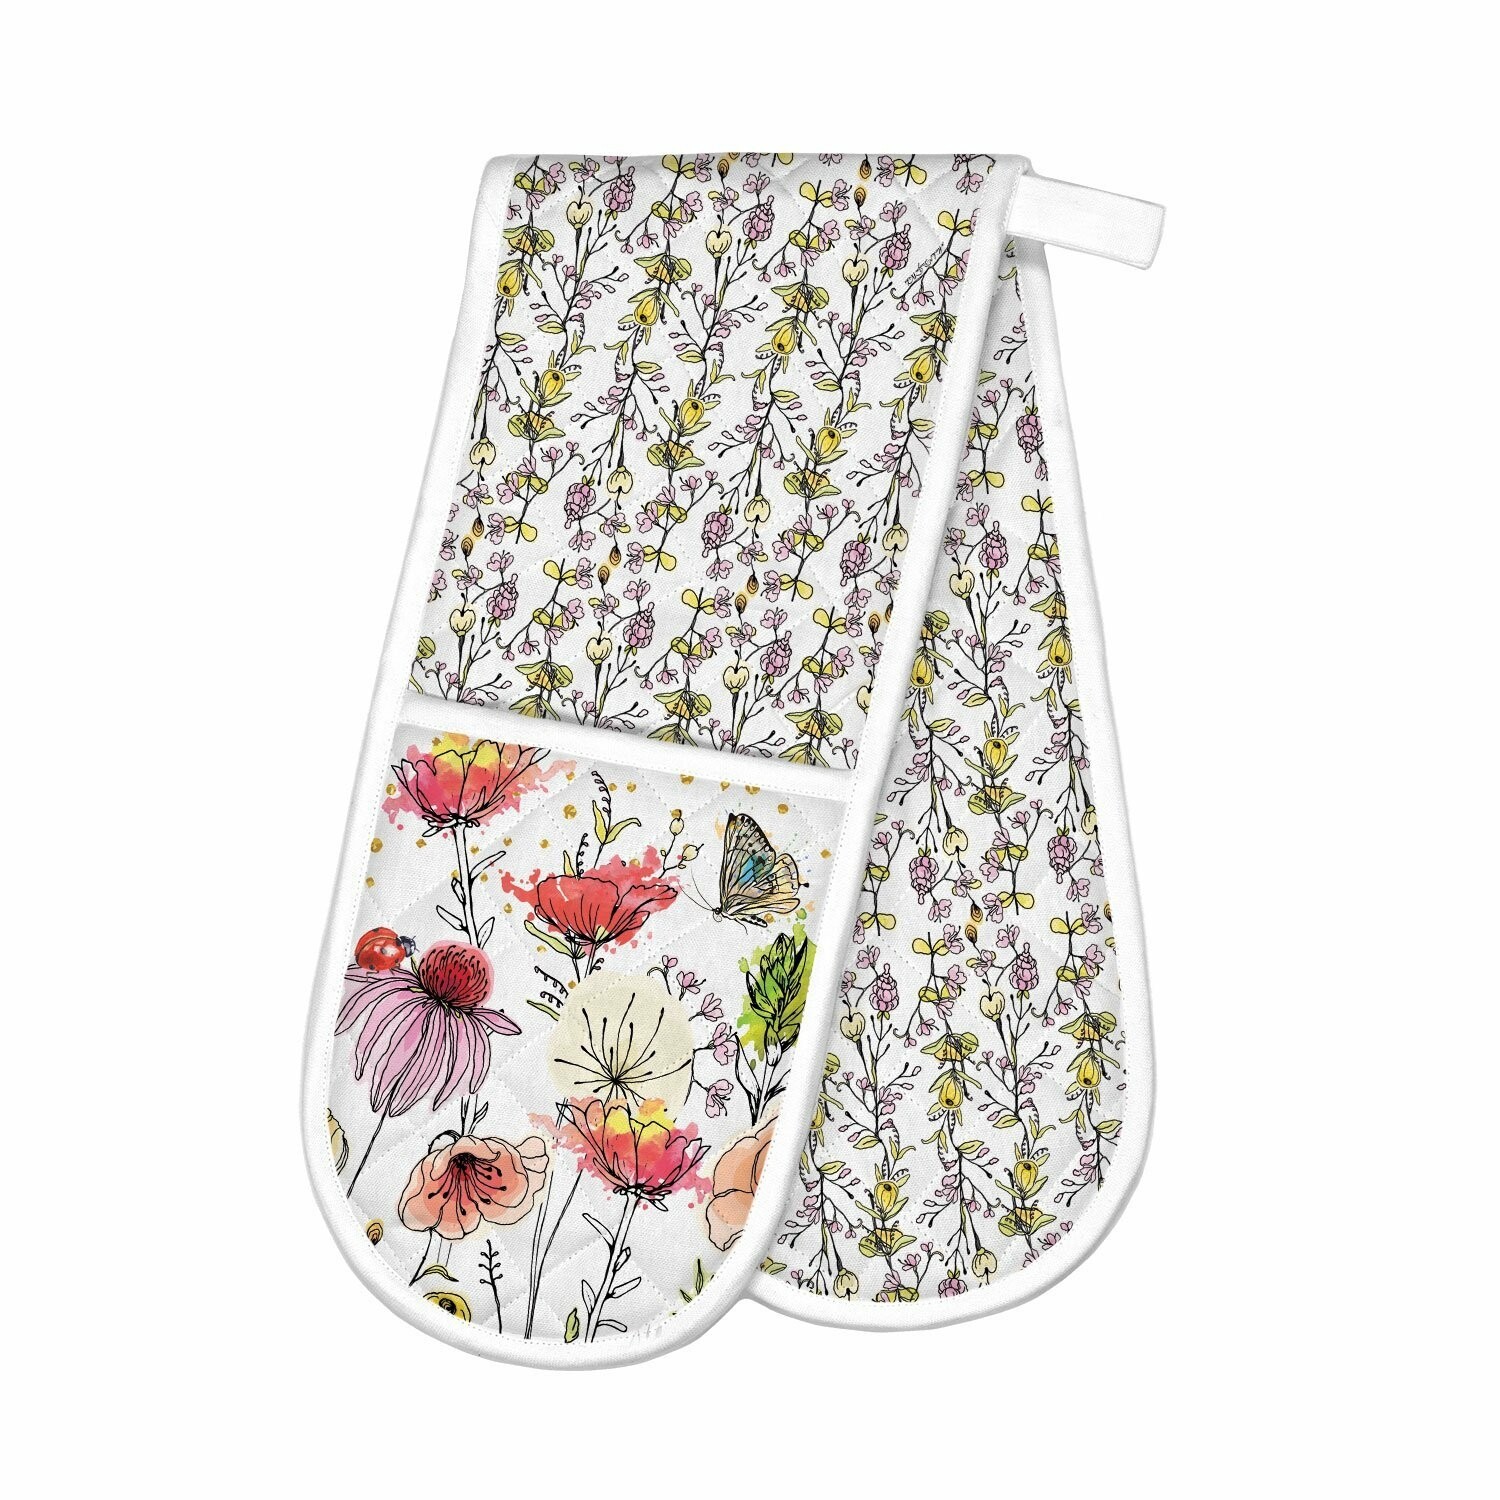 Michel Design Works Double Oven Gloves - Posies